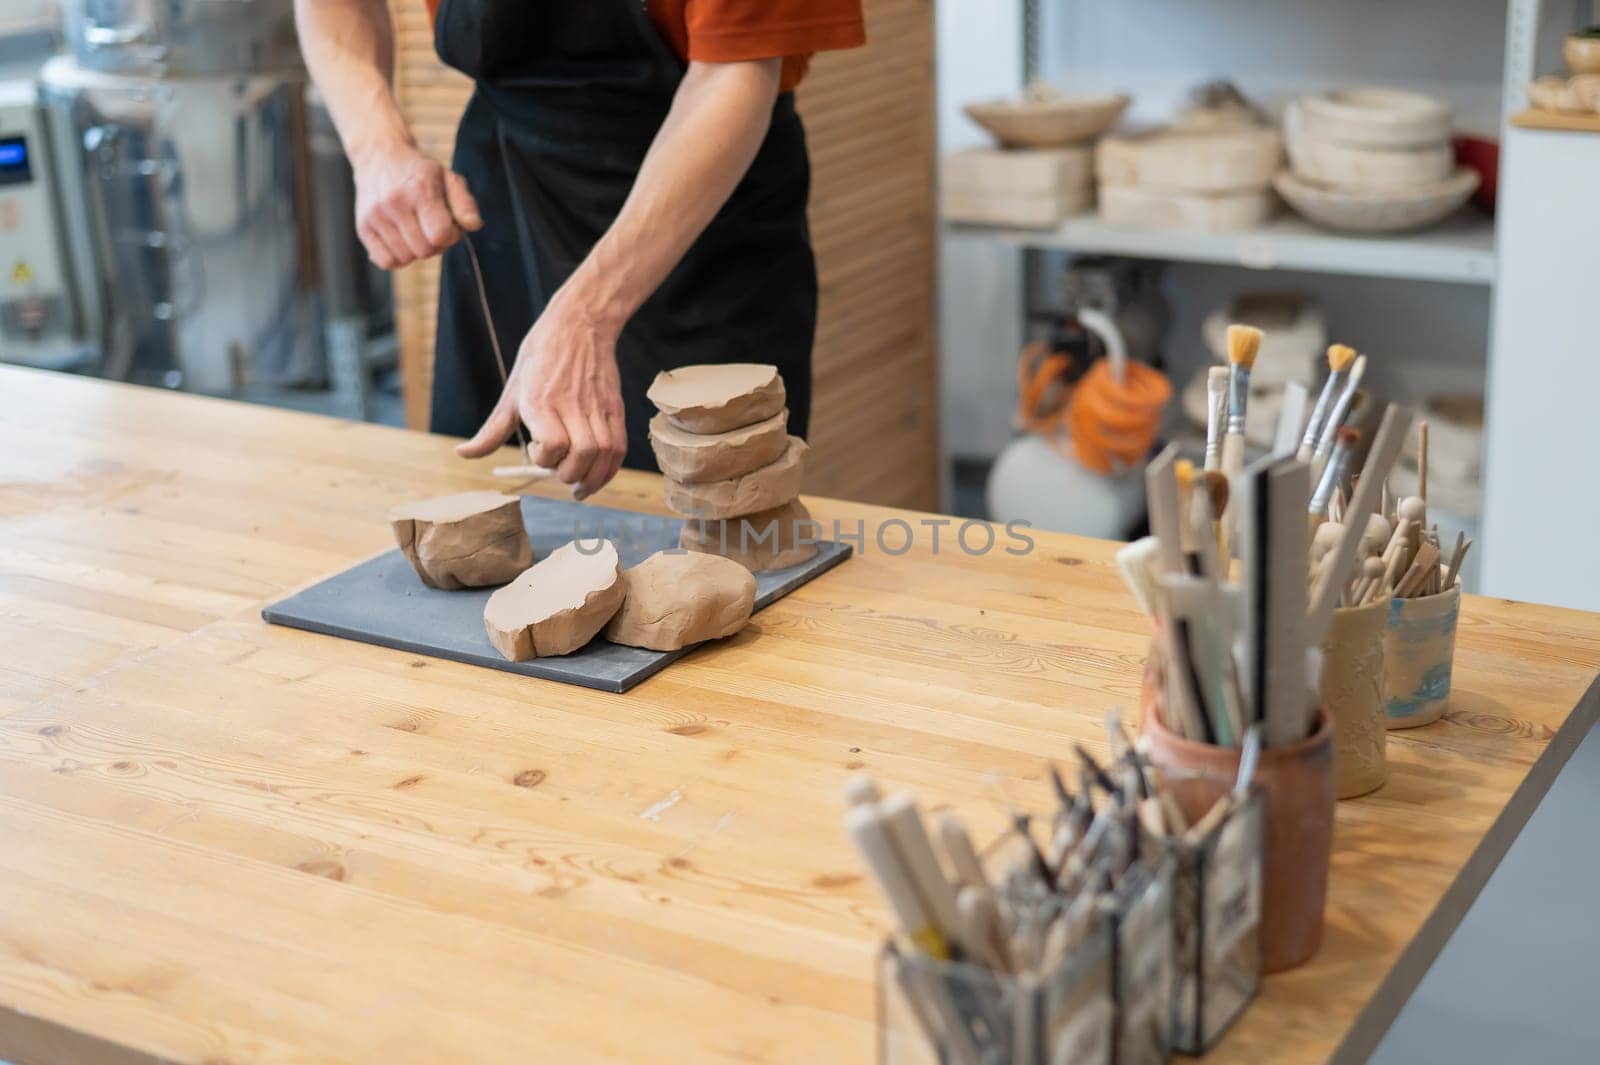 A potter cuts a piece of clay into pieces before using it in the workshop